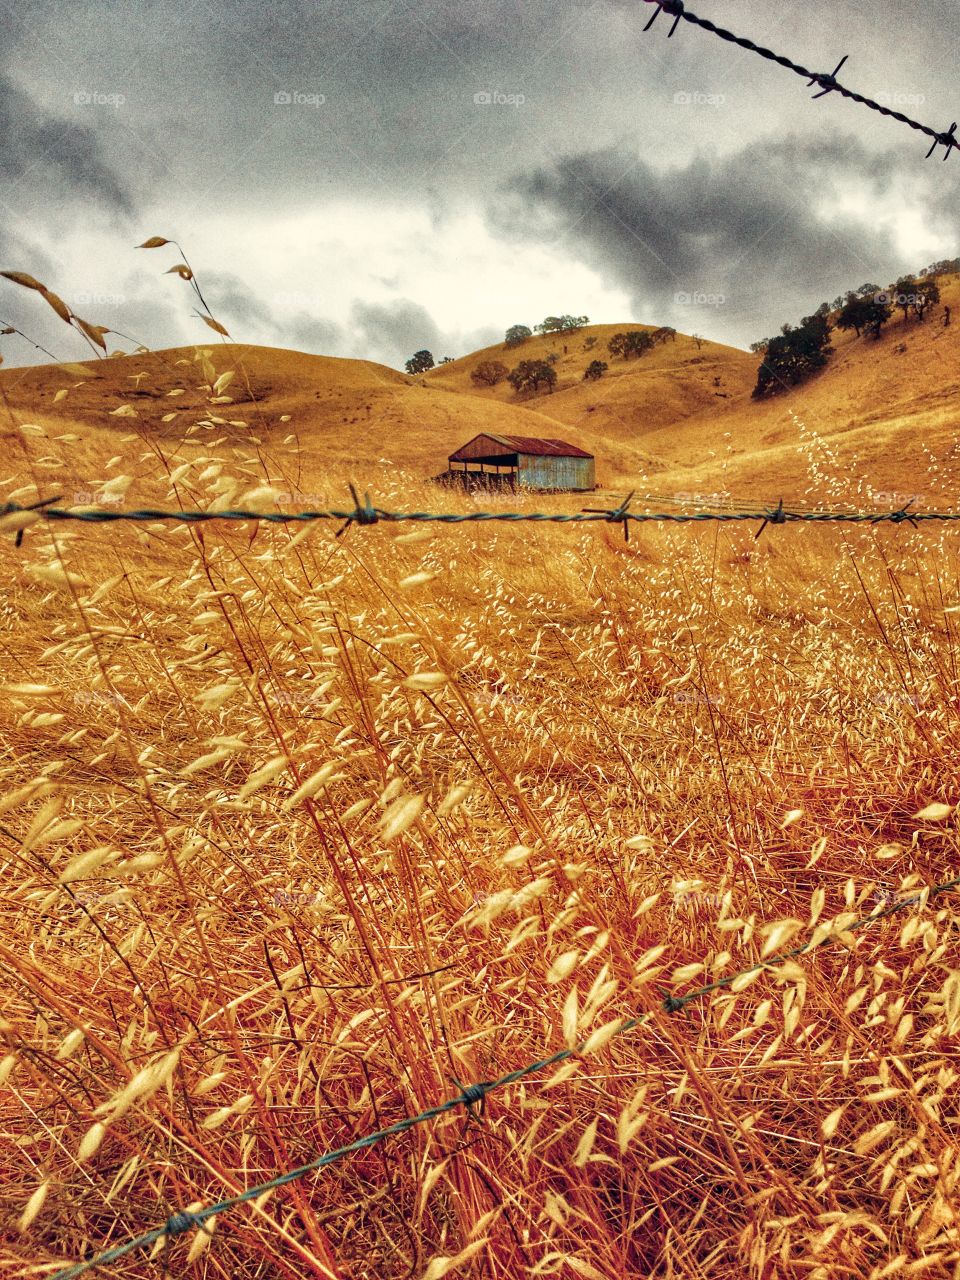 Country building on golden hills with golden grasses of California. 